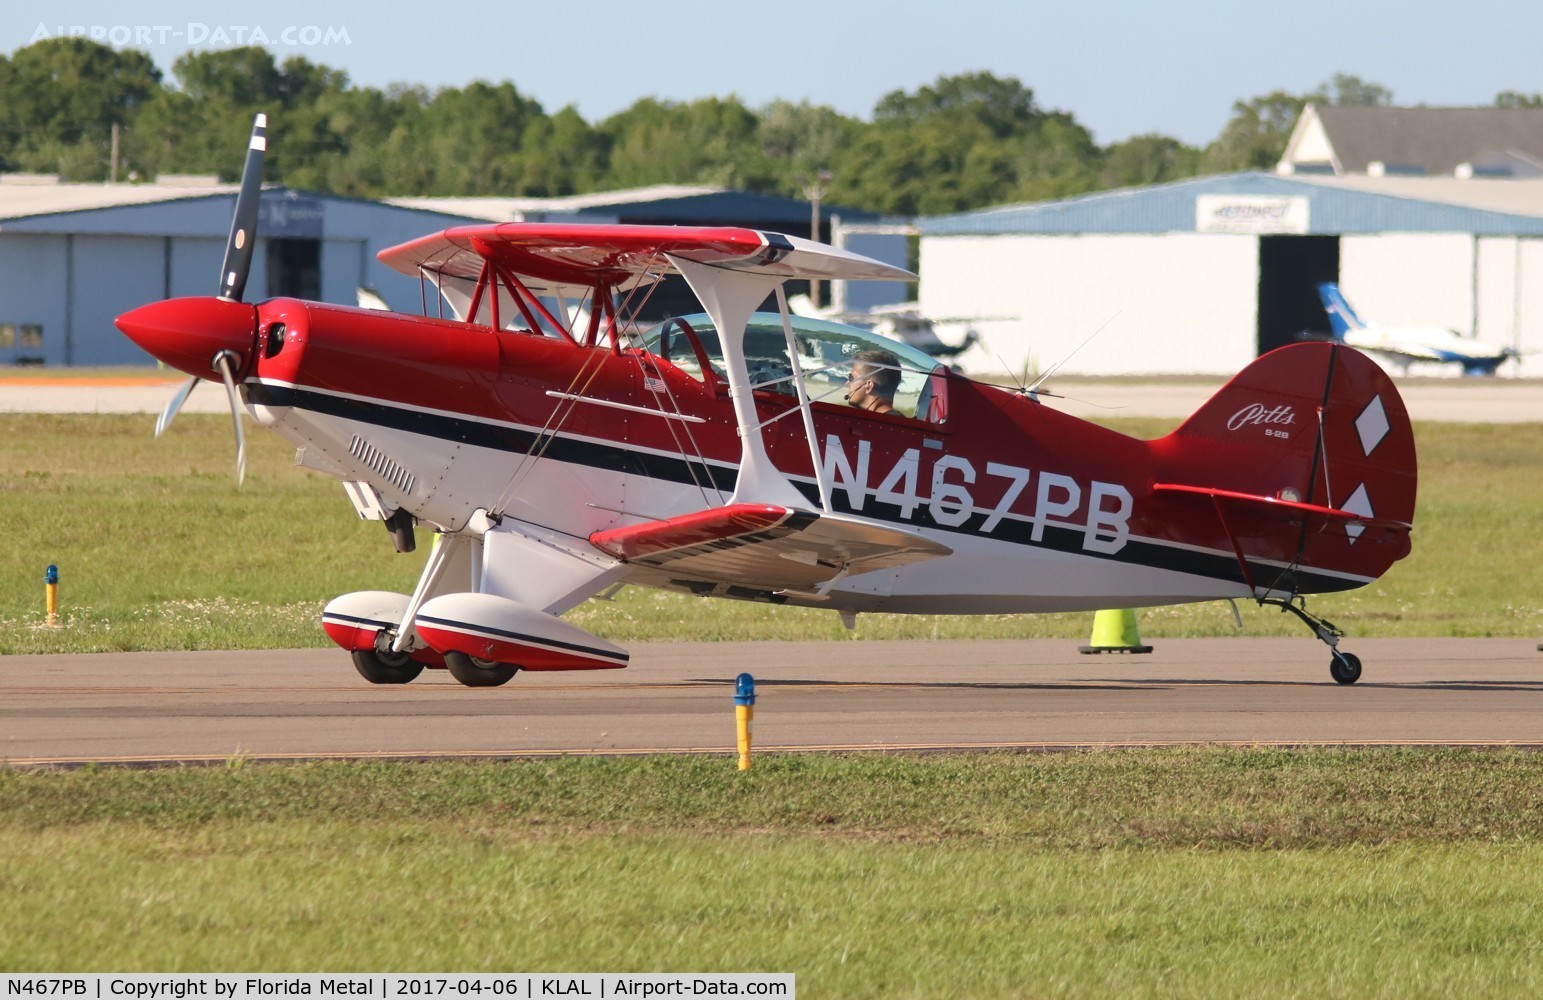 N467PB, 1997 Aviat Pitts S-2B Special C/N 5355, Pitts S-2 zx